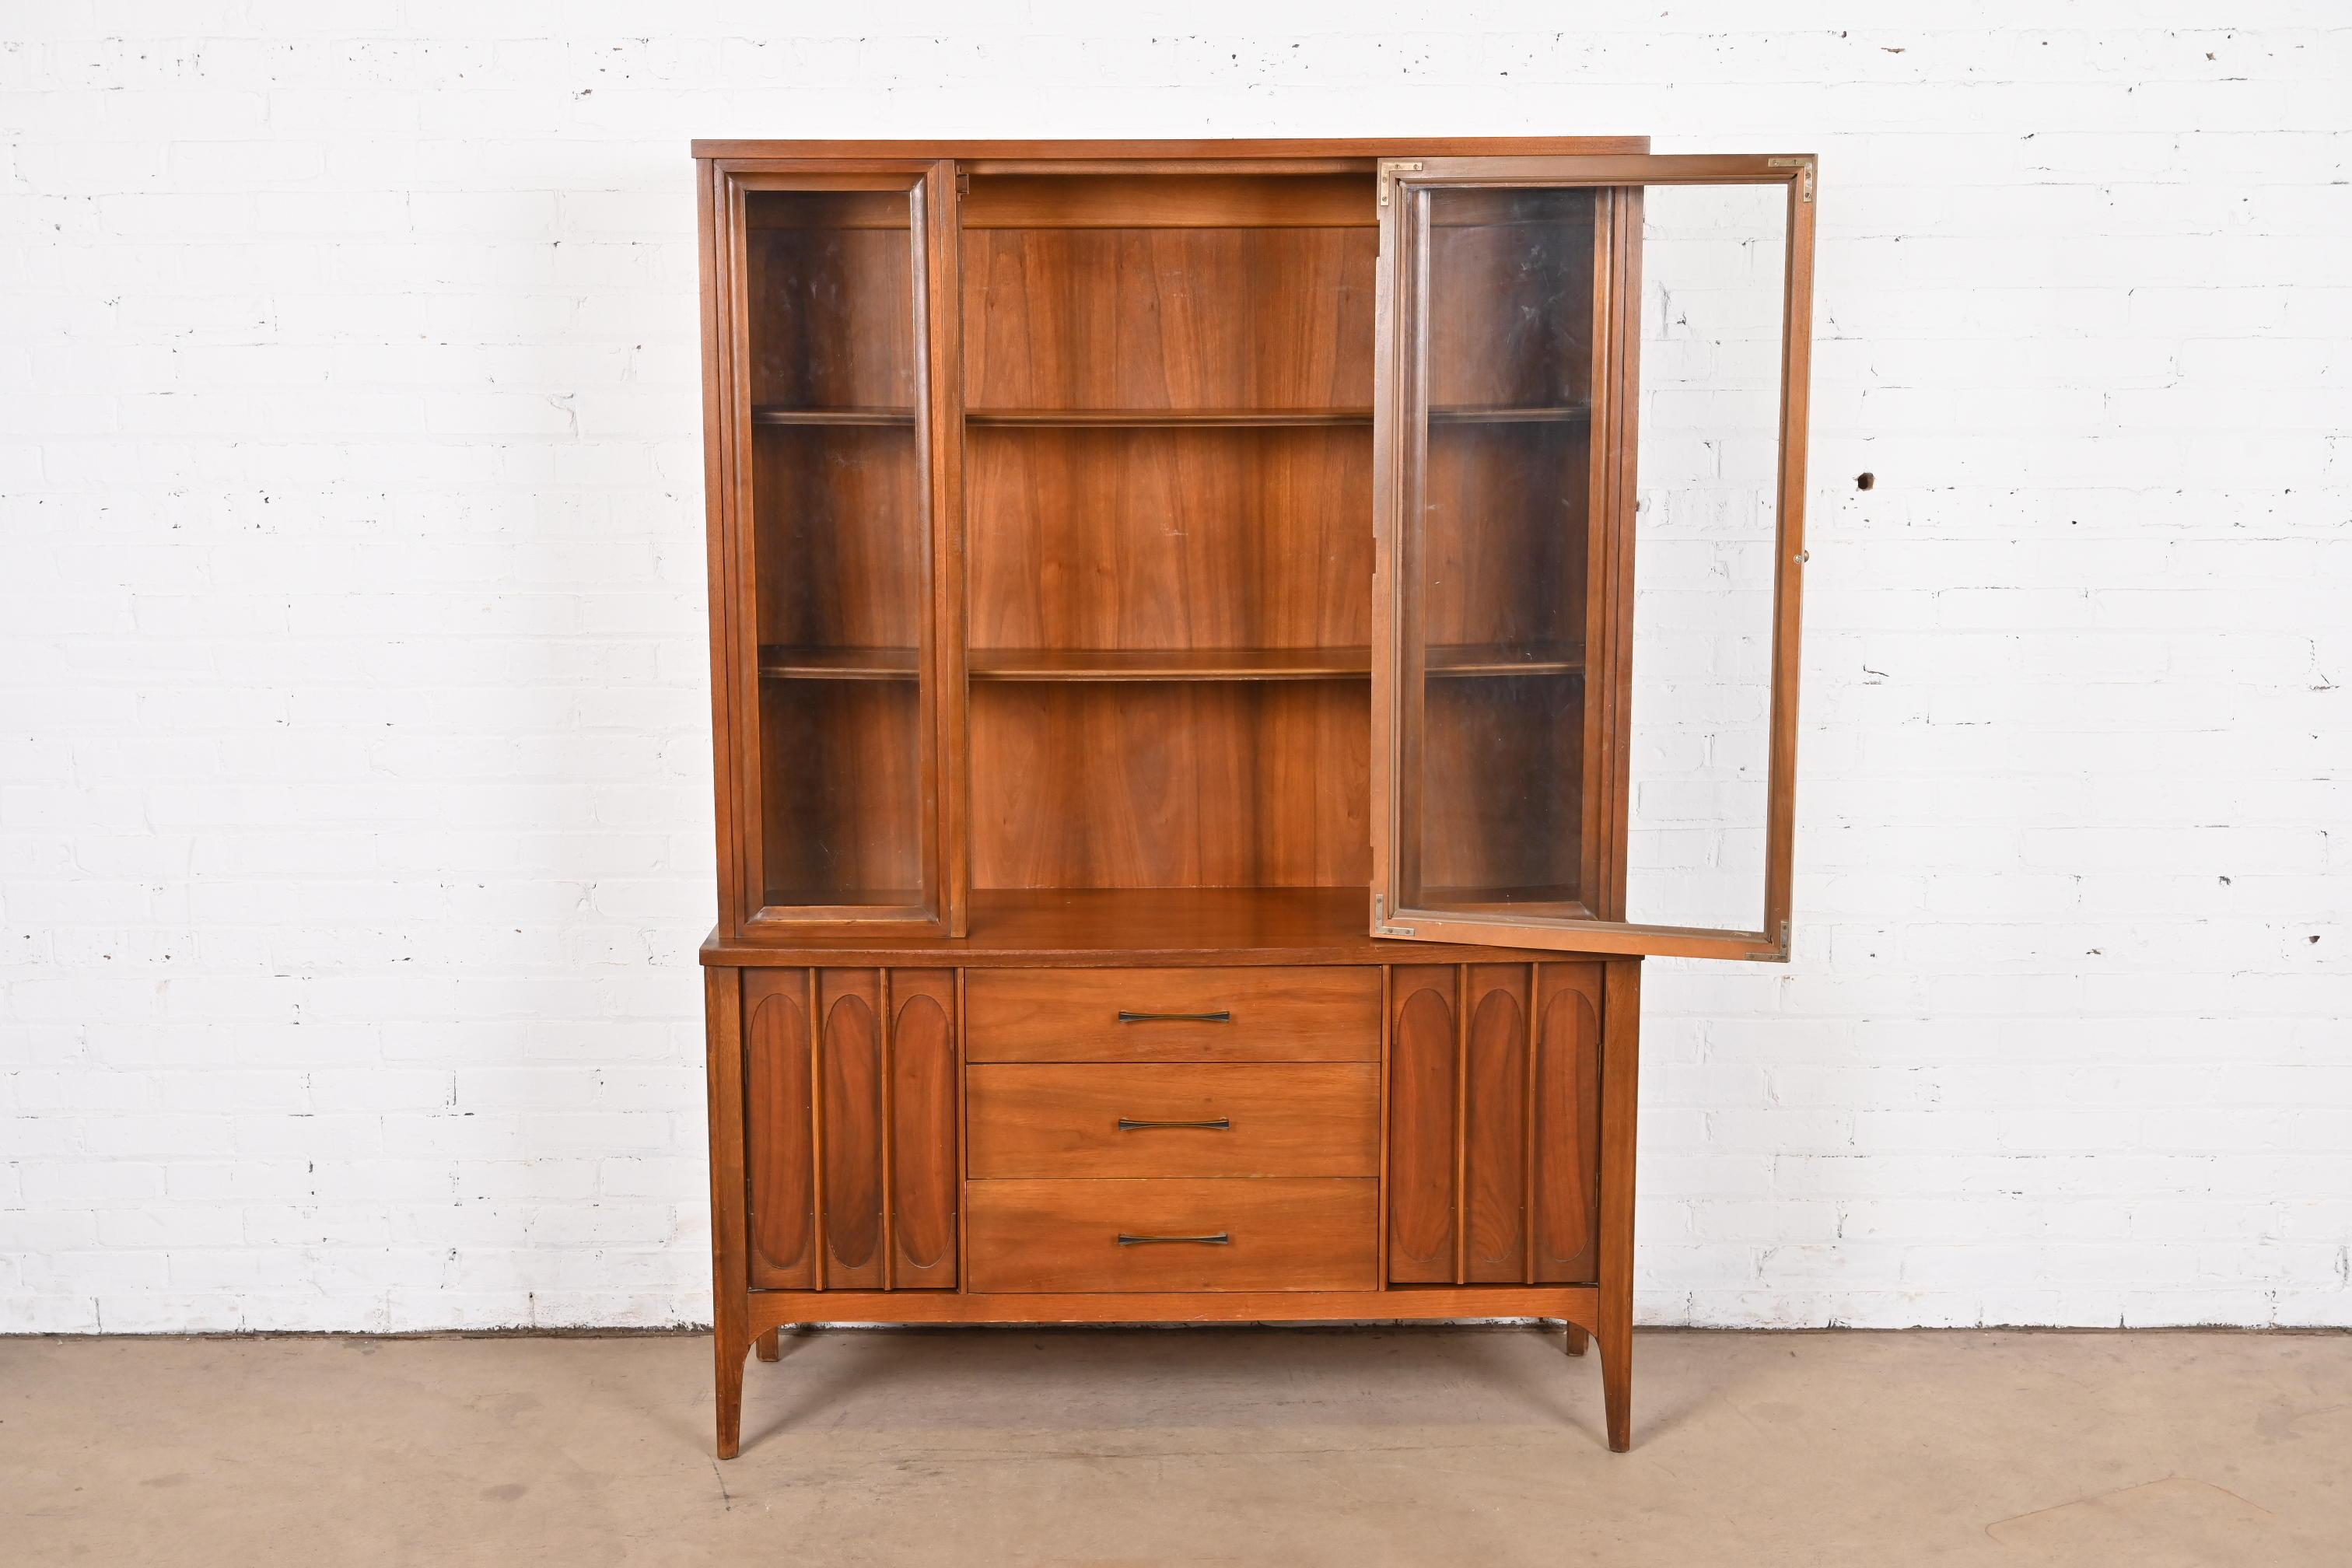 Broyhill Brasilia Style Sculpted Walnut Breakfront Bookcase or China Cabinet 2